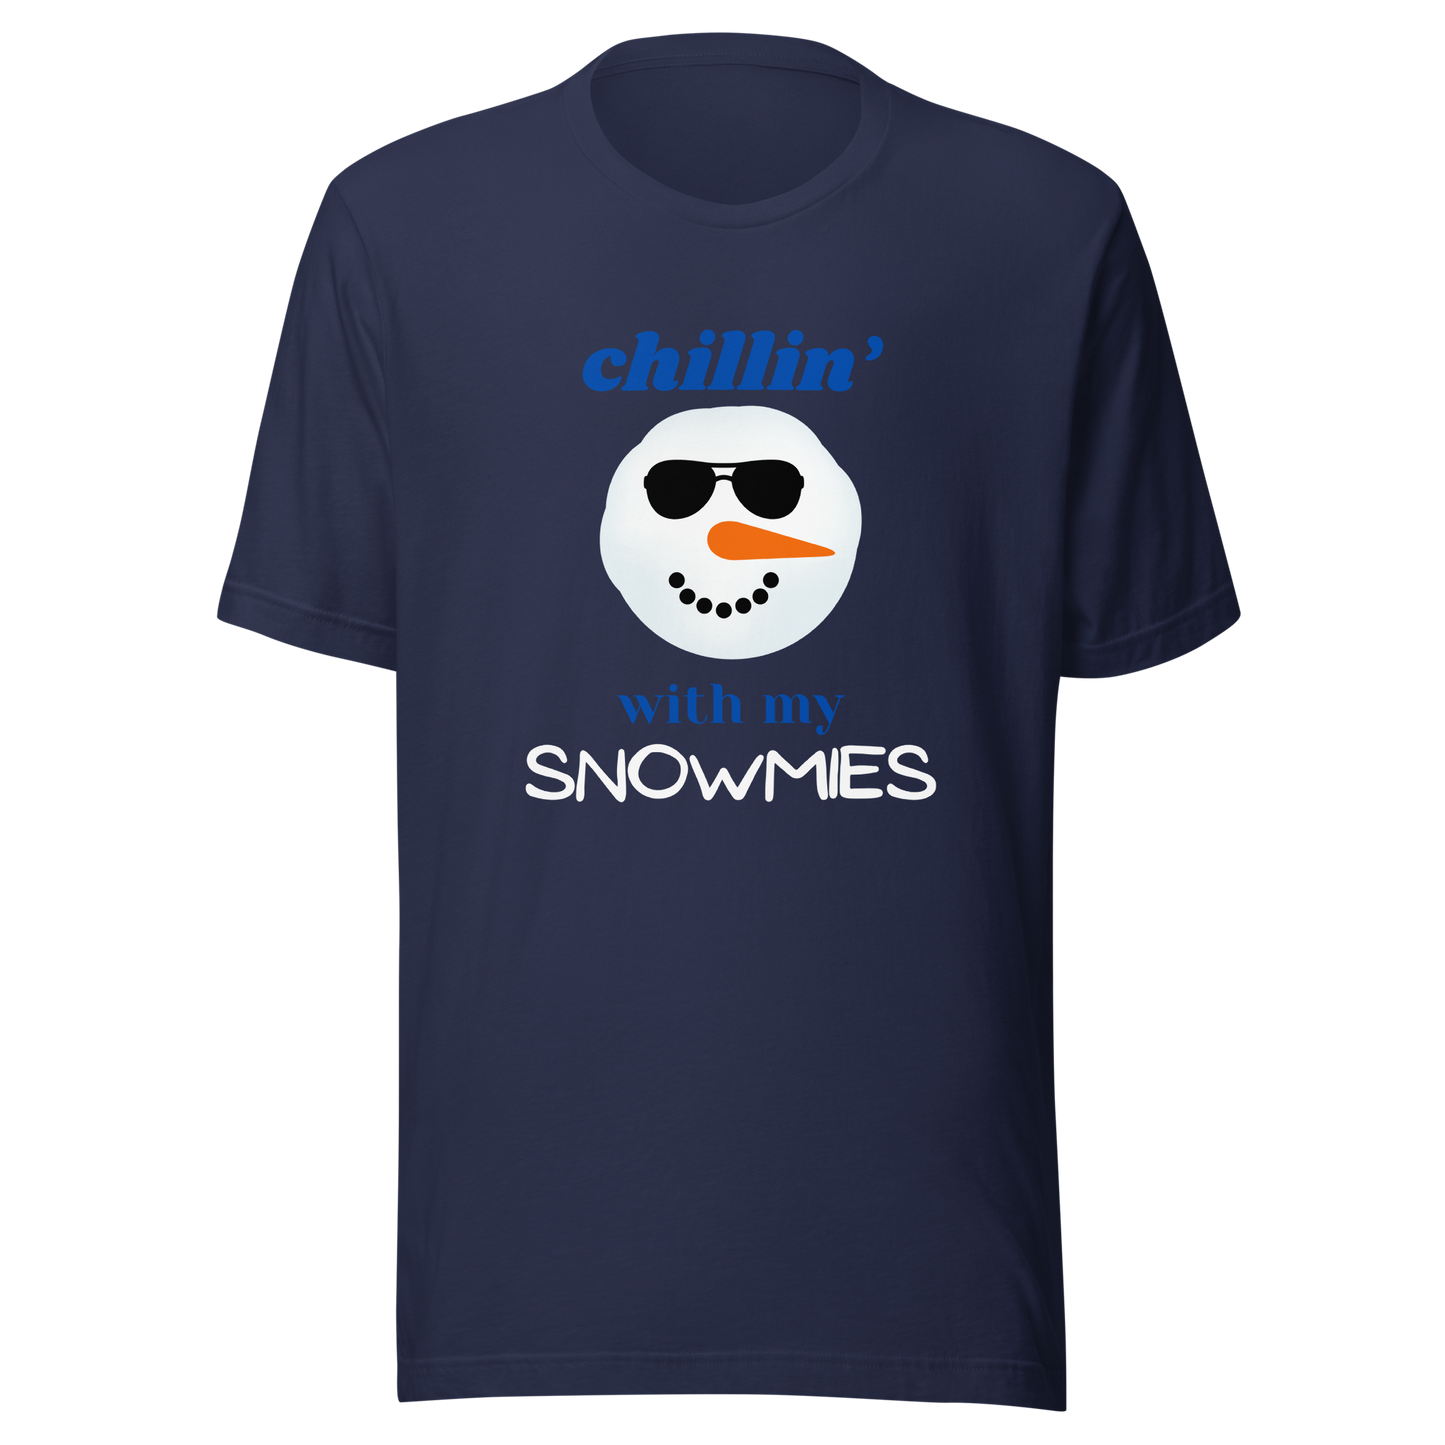 Chillin' With My Snowmies Unisex T-Shirt